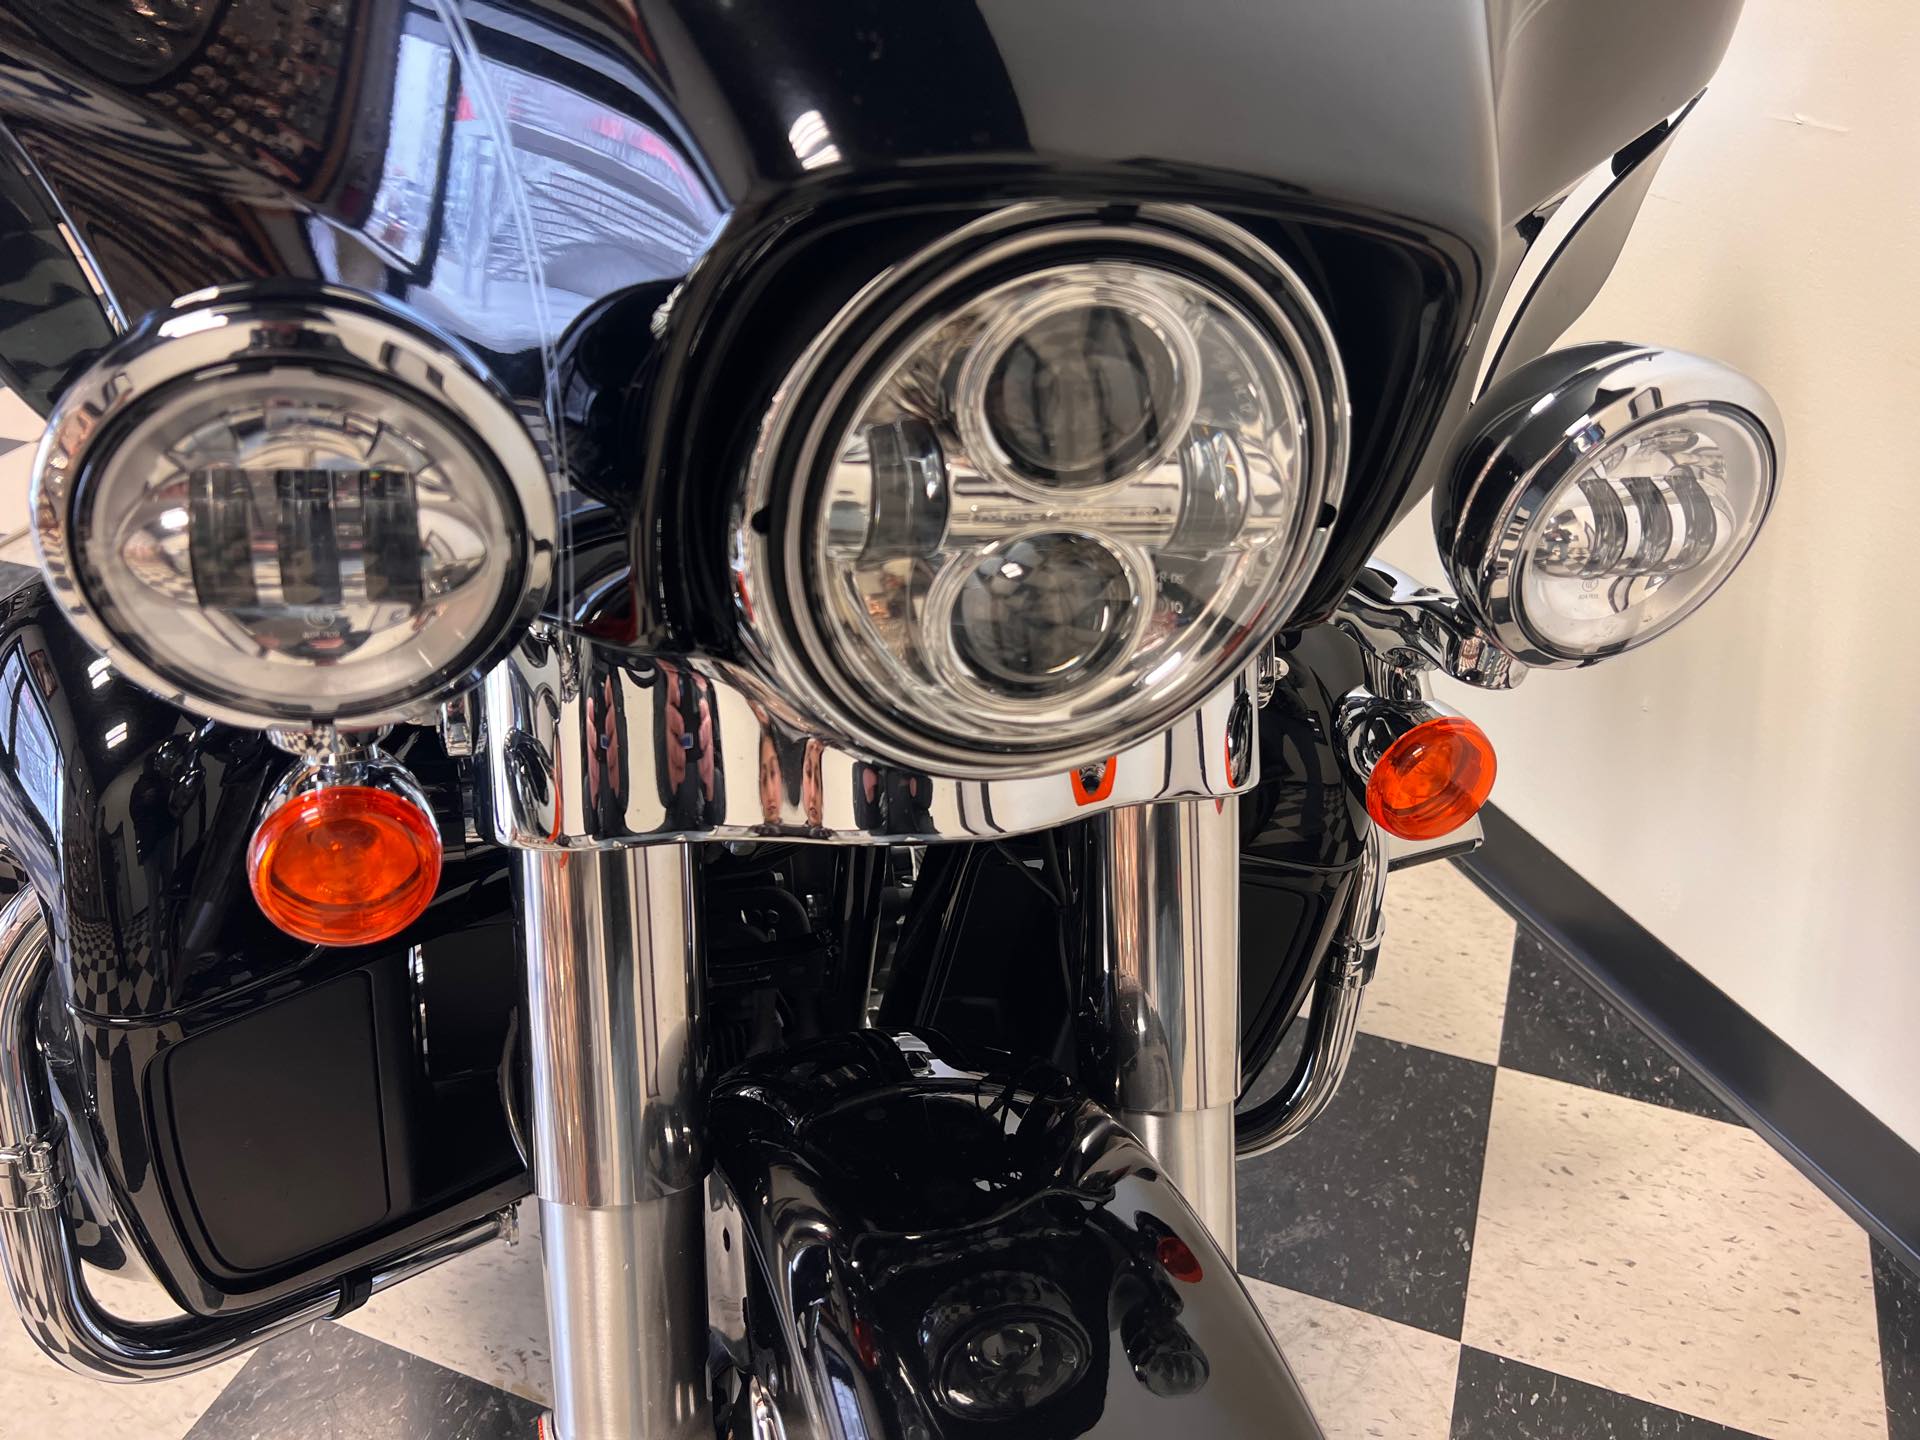 2015 Harley-Davidson Electra Glide Ultra Classic Low at Deluxe Harley Davidson